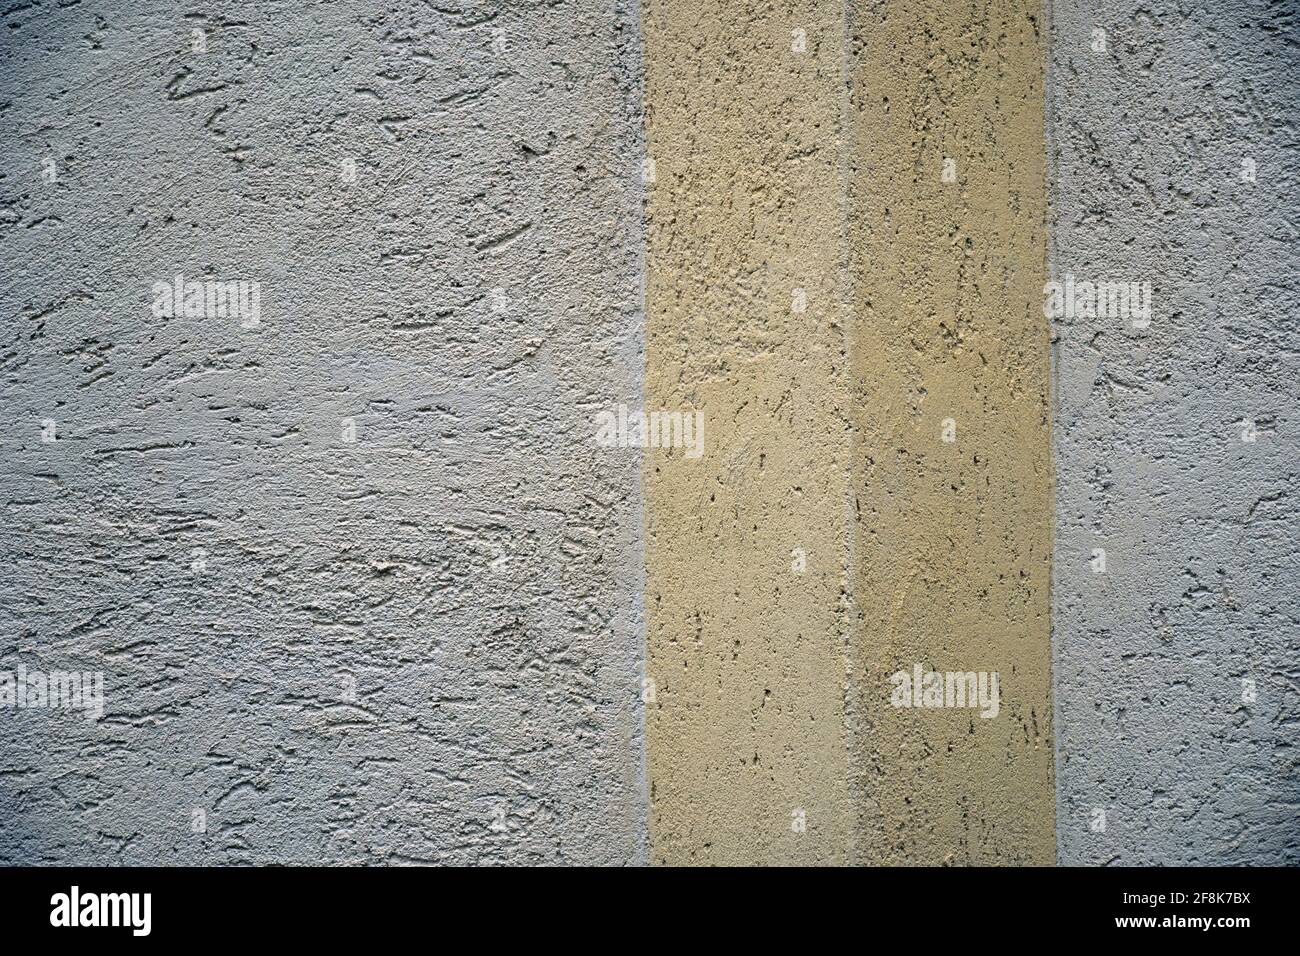 Concrete wall, lines and shapes in an architectural simple concept photography, close-up, hand held, colour photography with copy space. Stock Photo